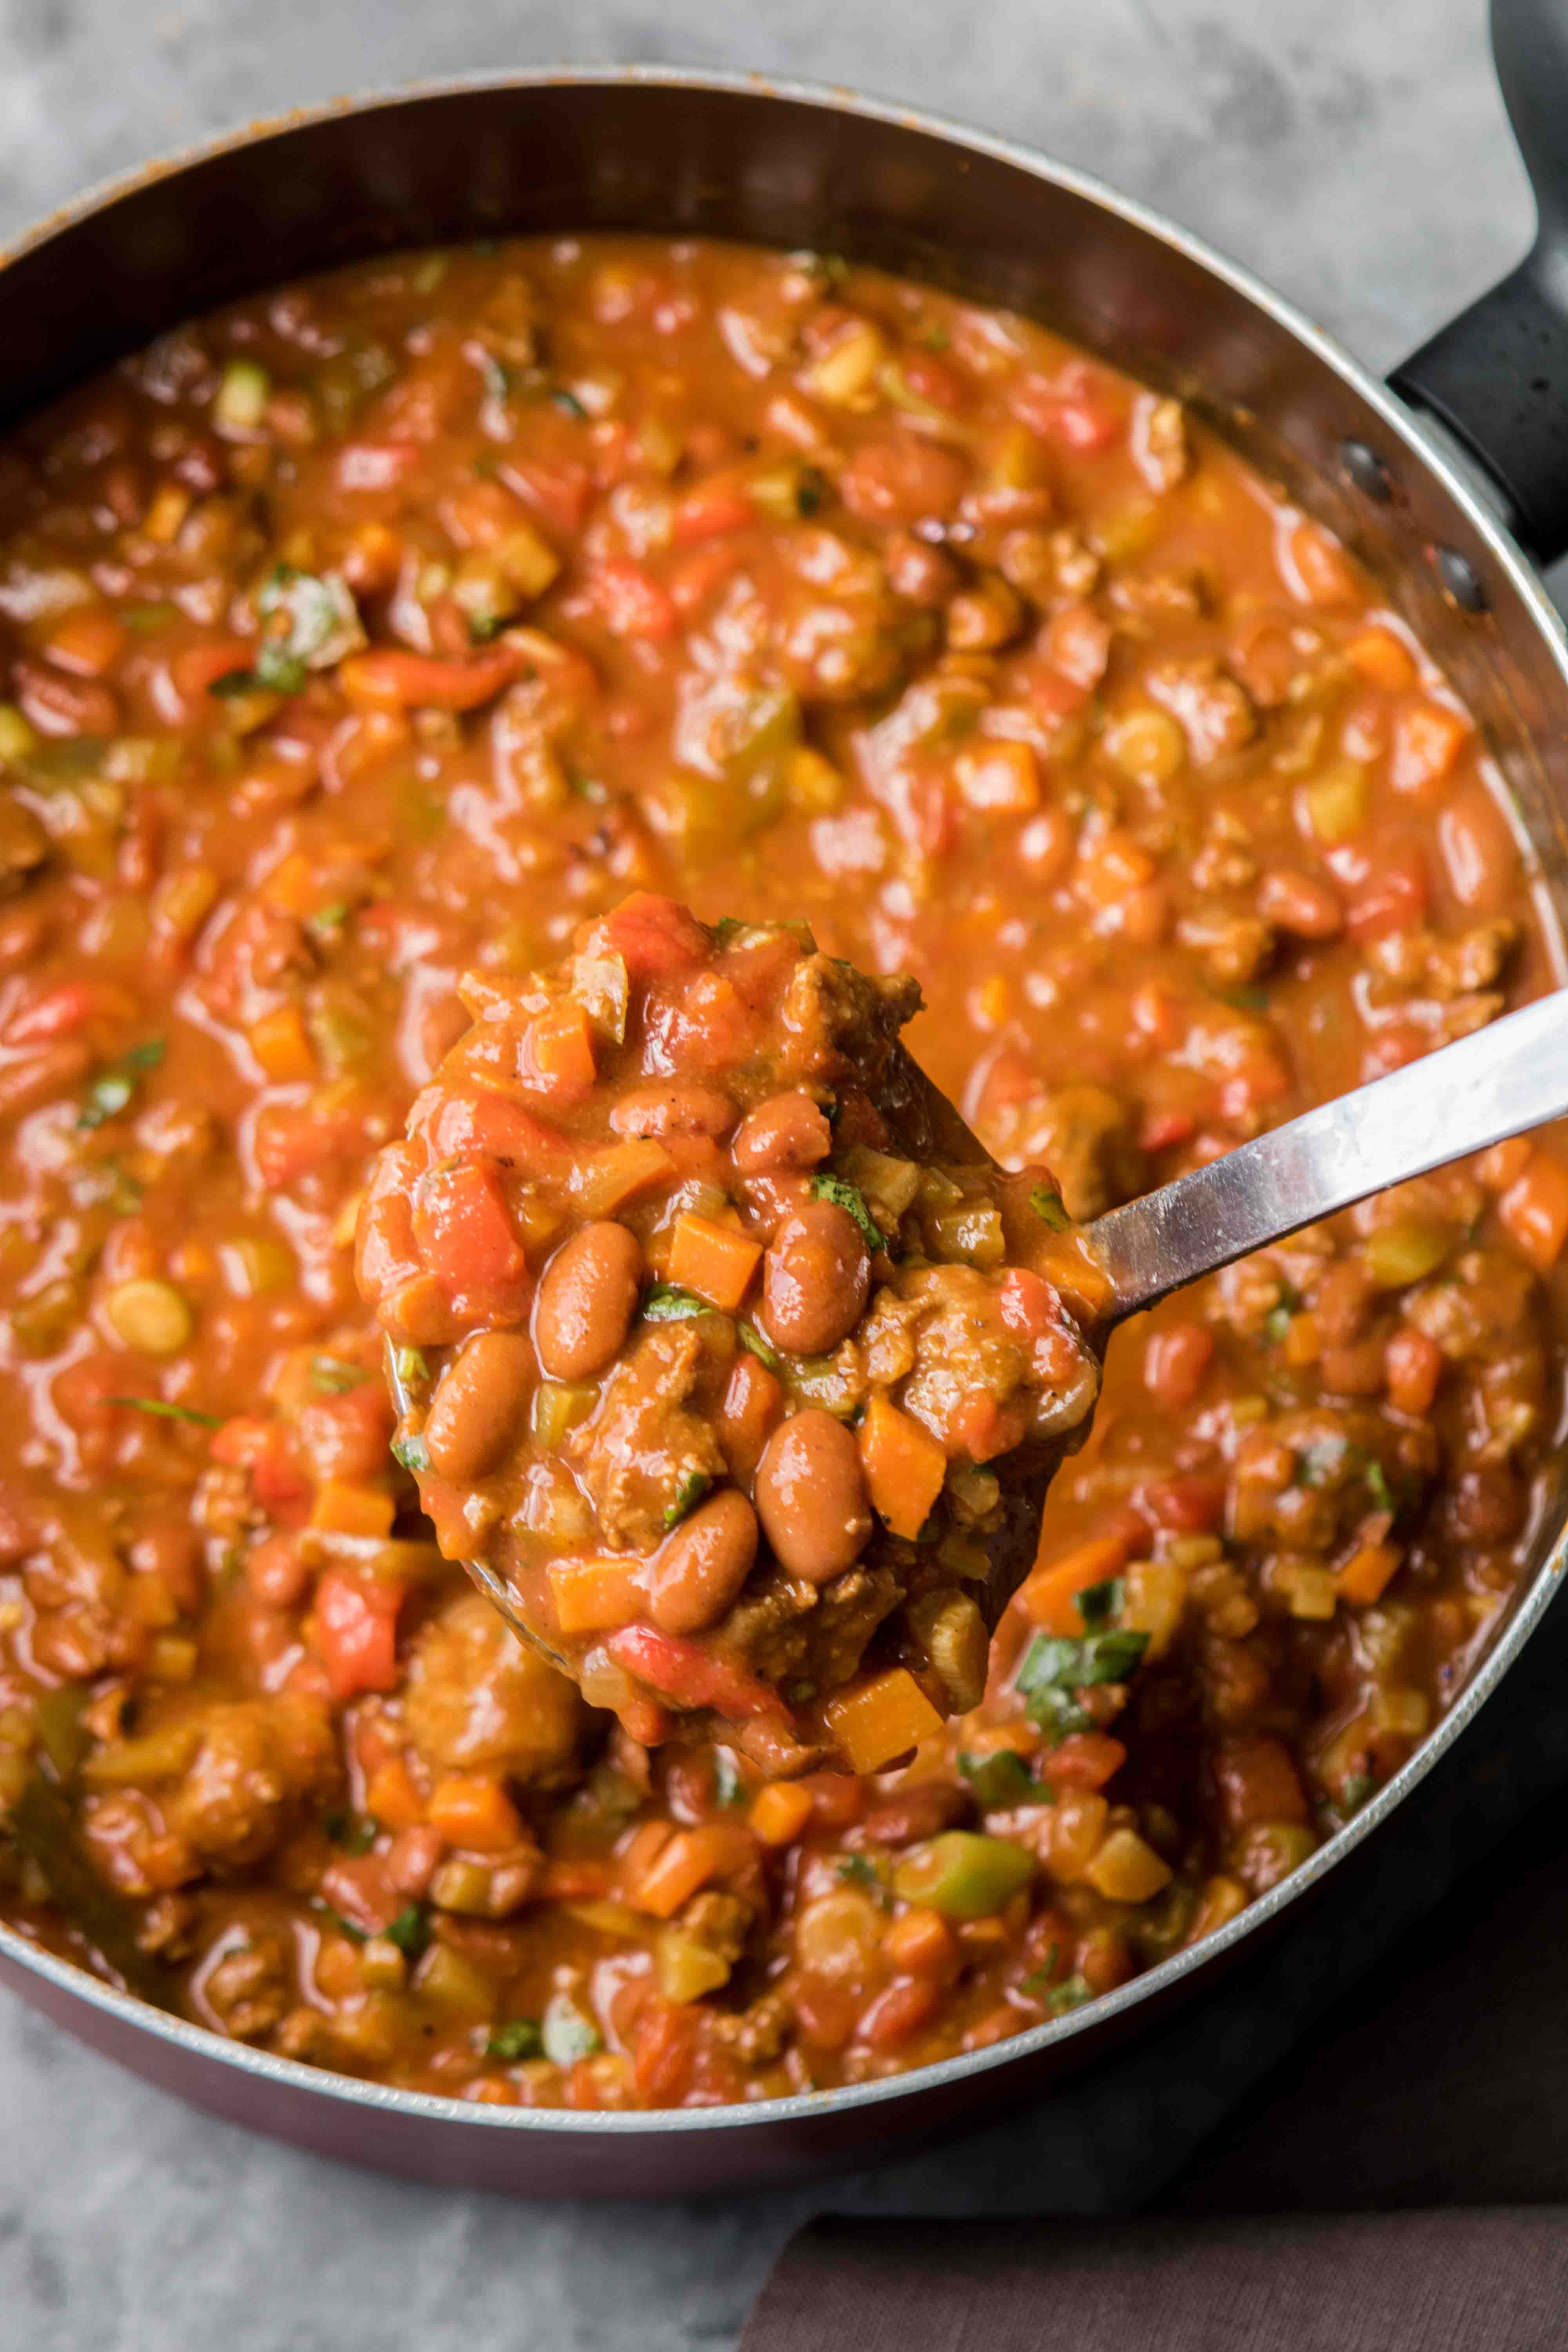 Delicious Mediterranean Chili recipe with a twist - Lifestyle of a Foodie